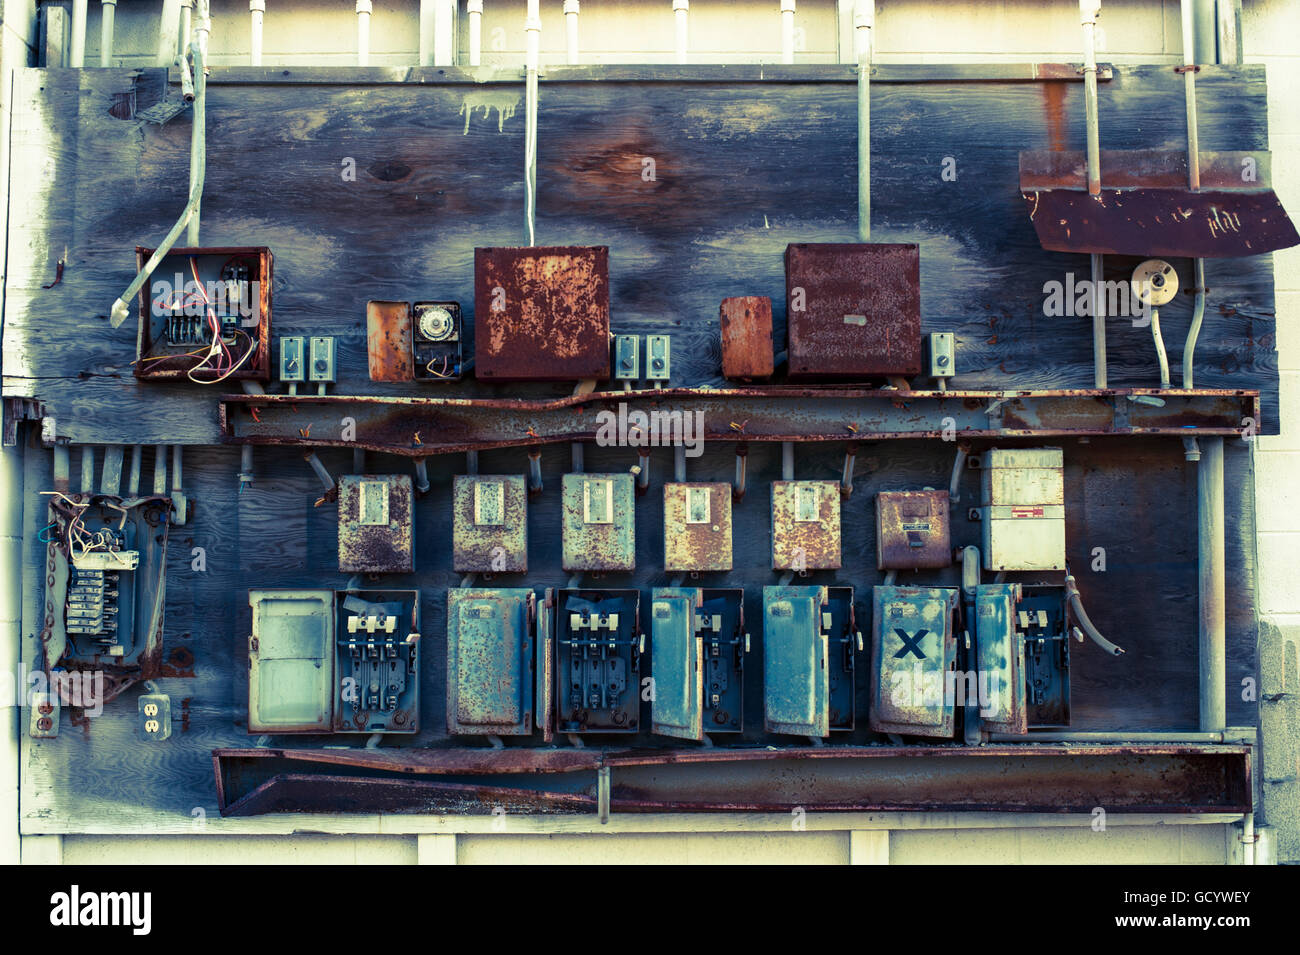 Electrical boxes outside on side of building rusting, damaged and dangerous Stock Photo